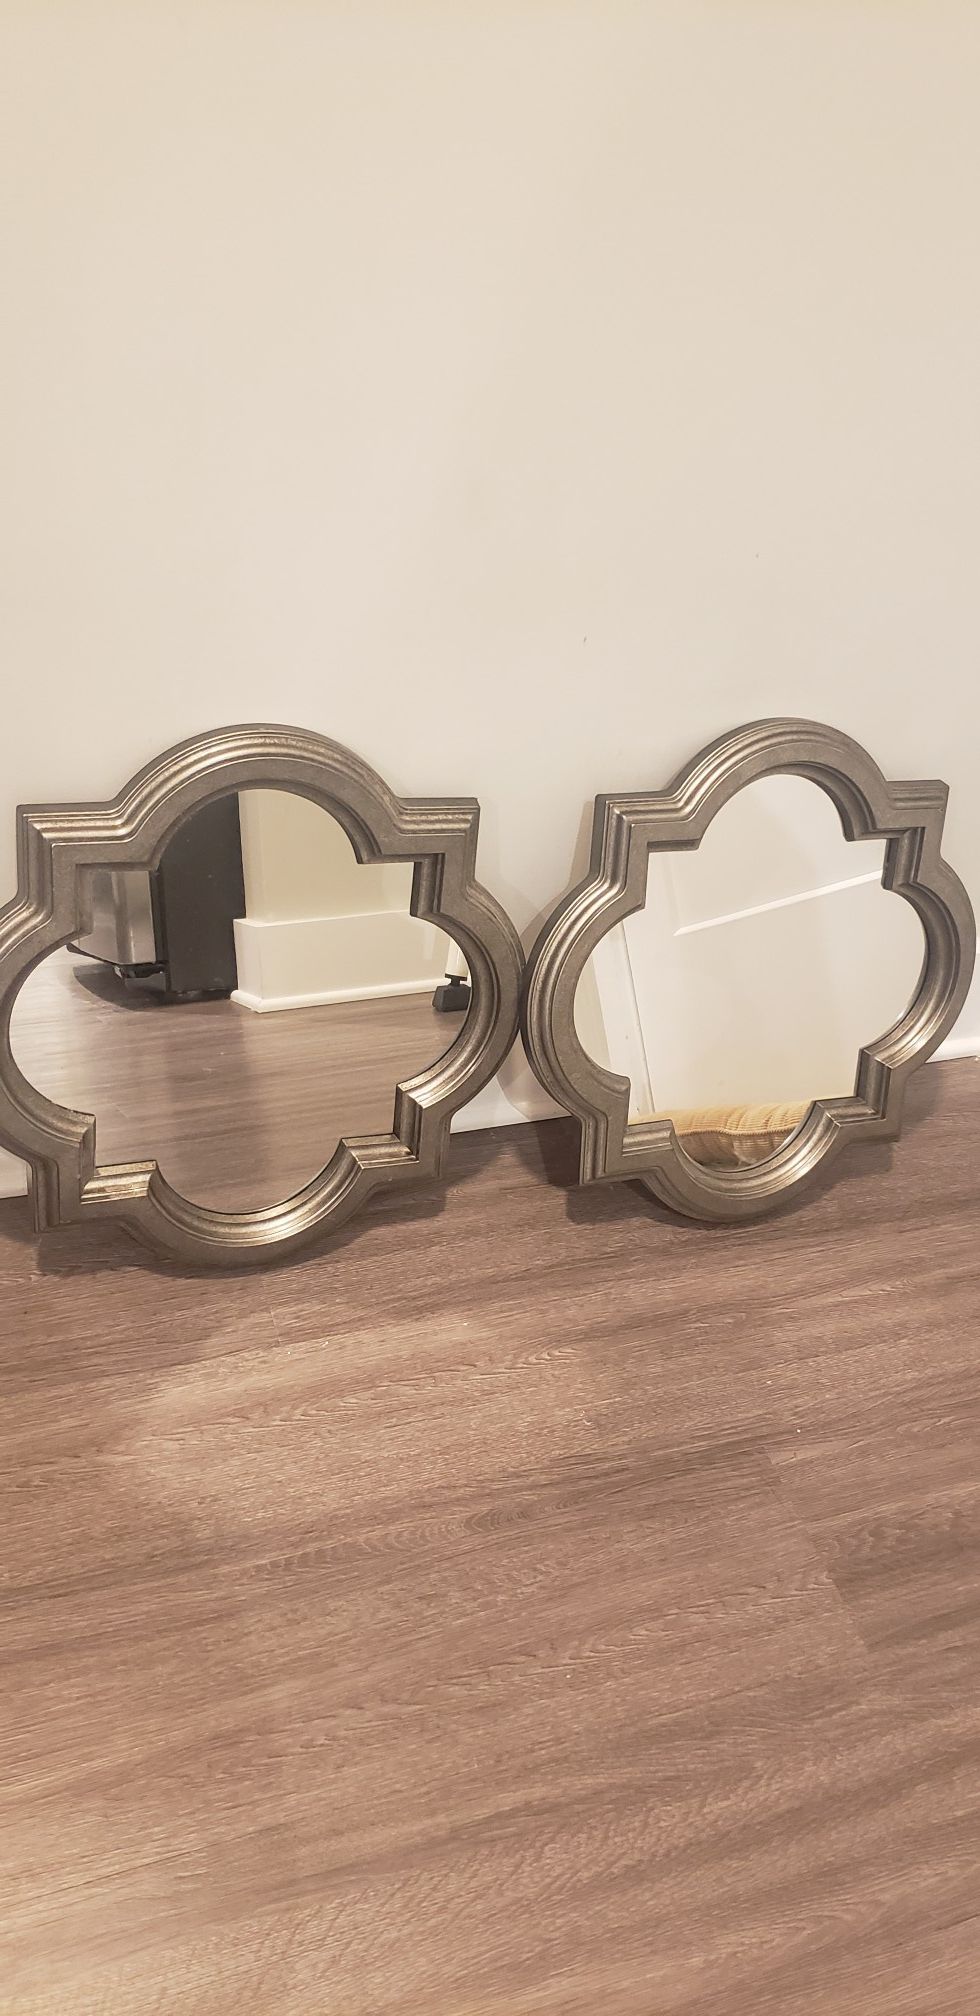 2 mirrors for $25